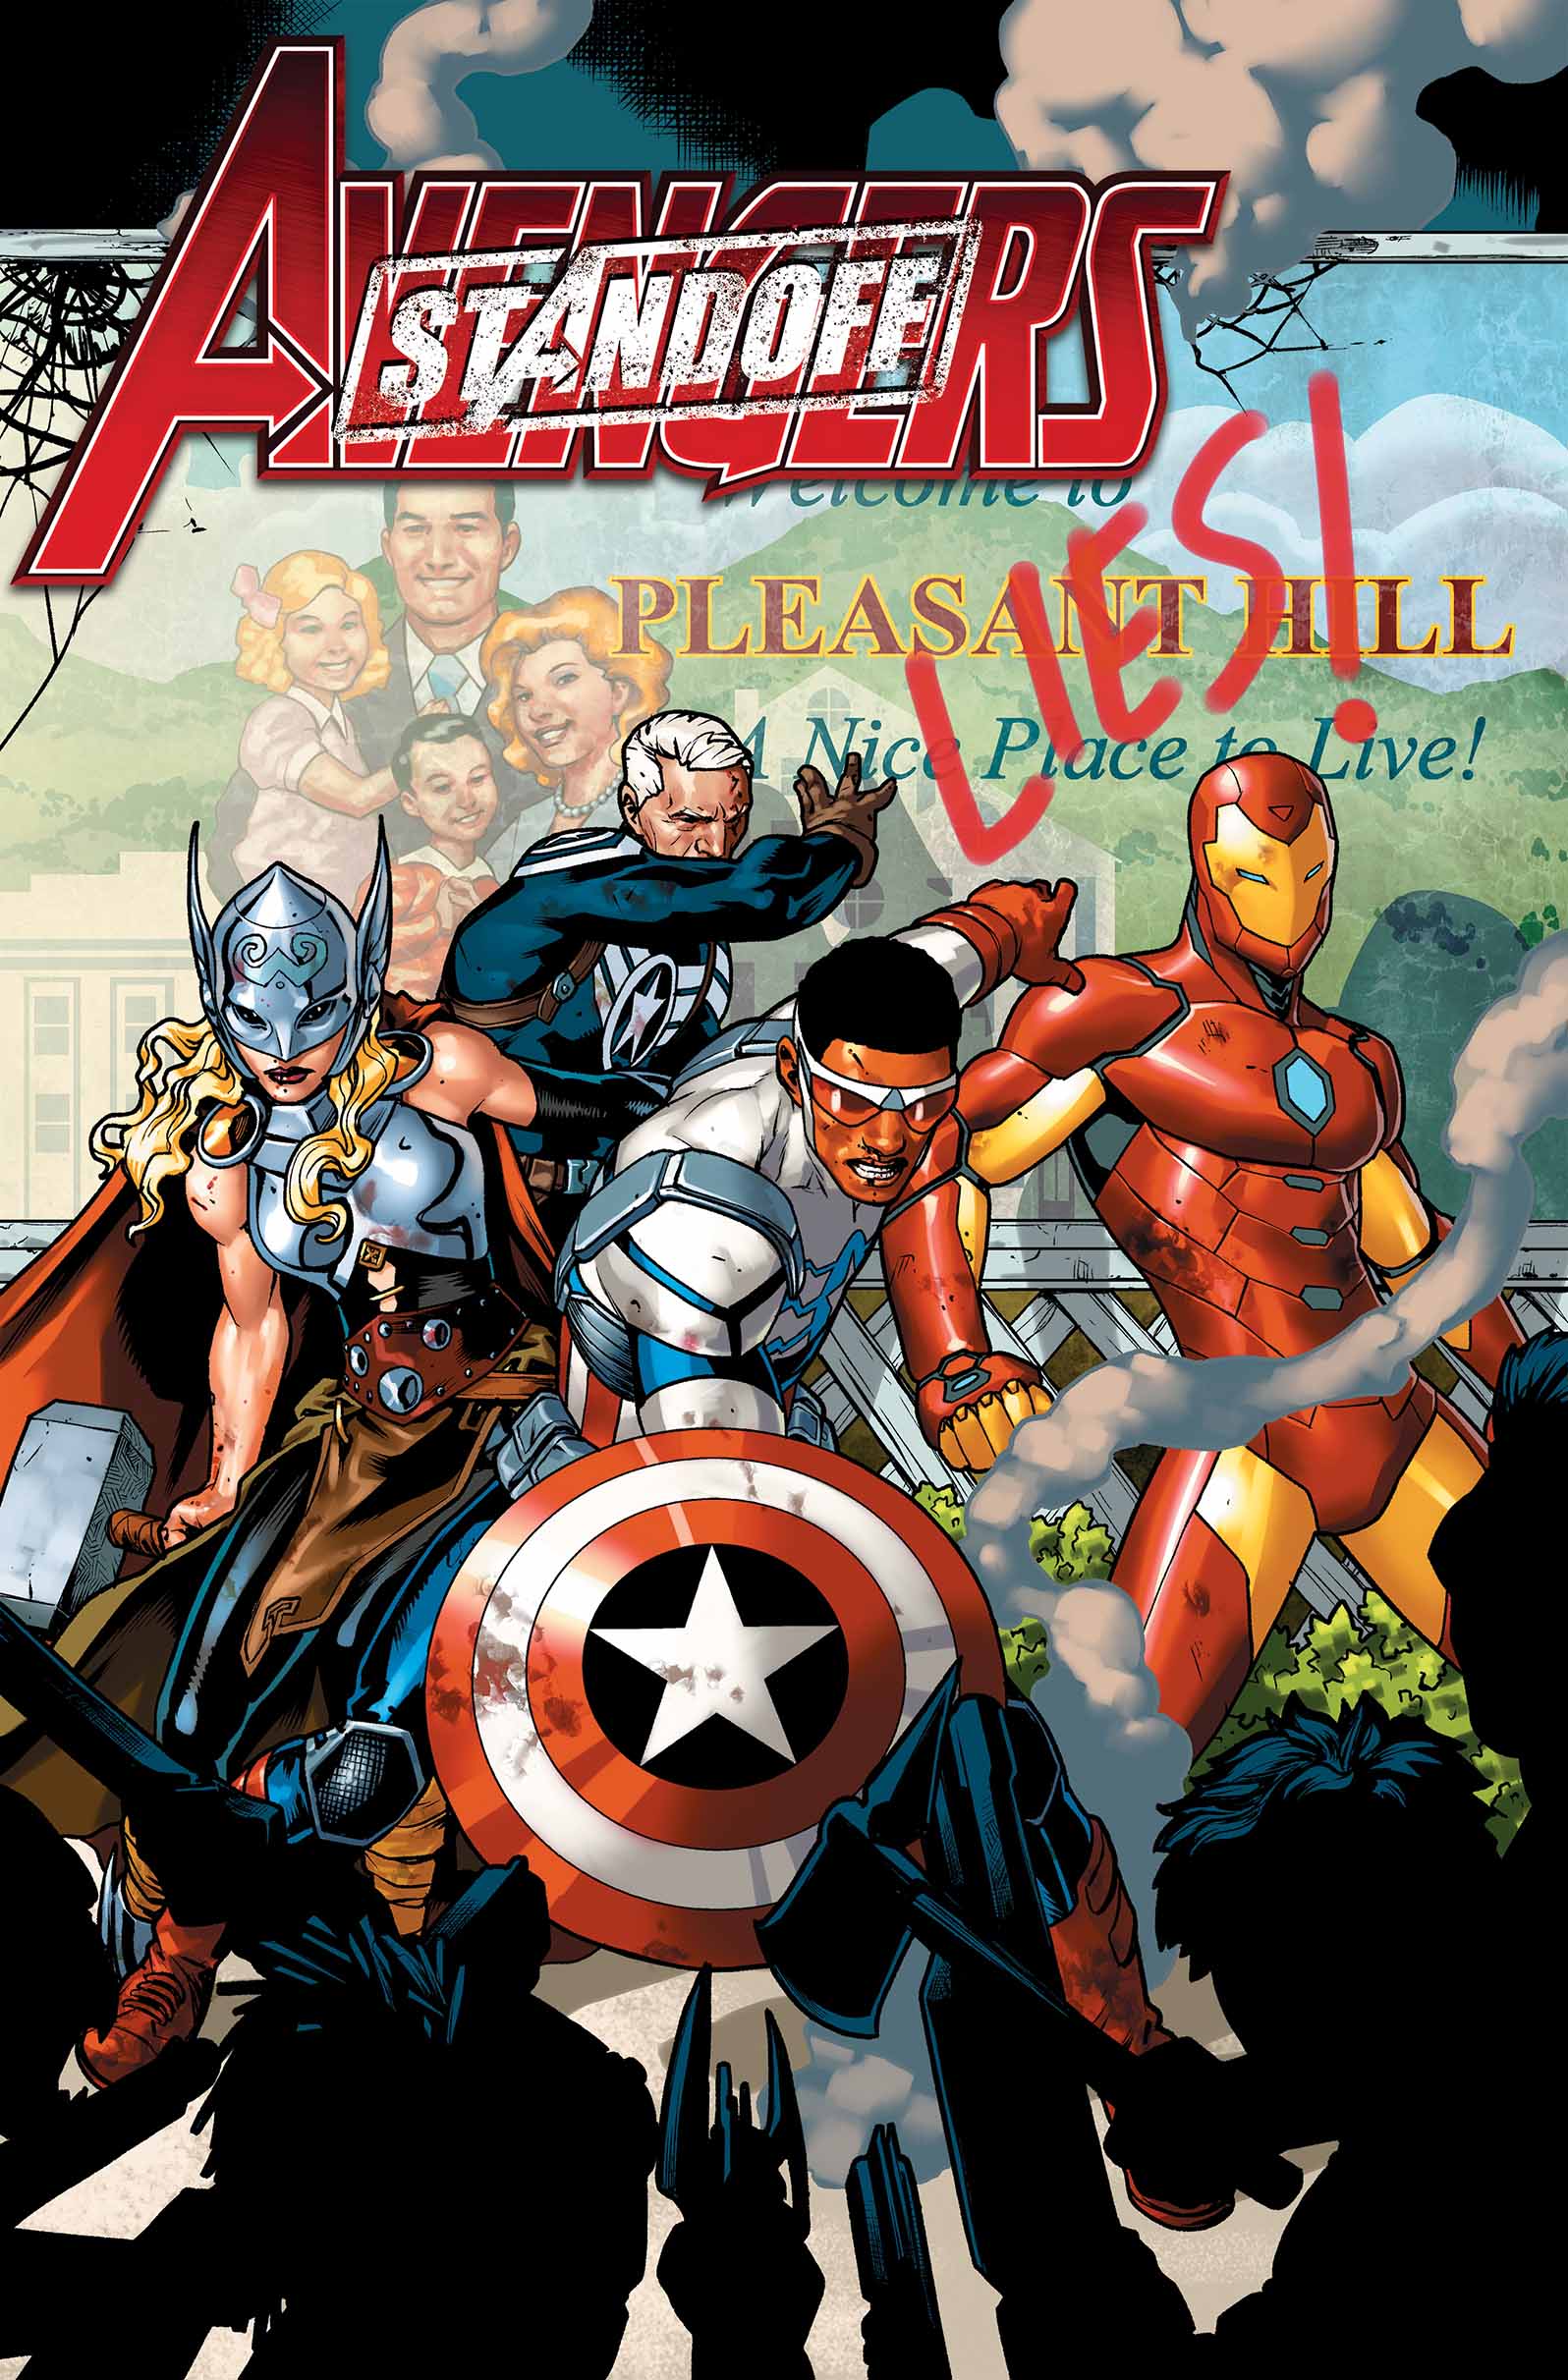 Marvel Preview: Avengers Standoff: Assault on Pleasant Hill #1